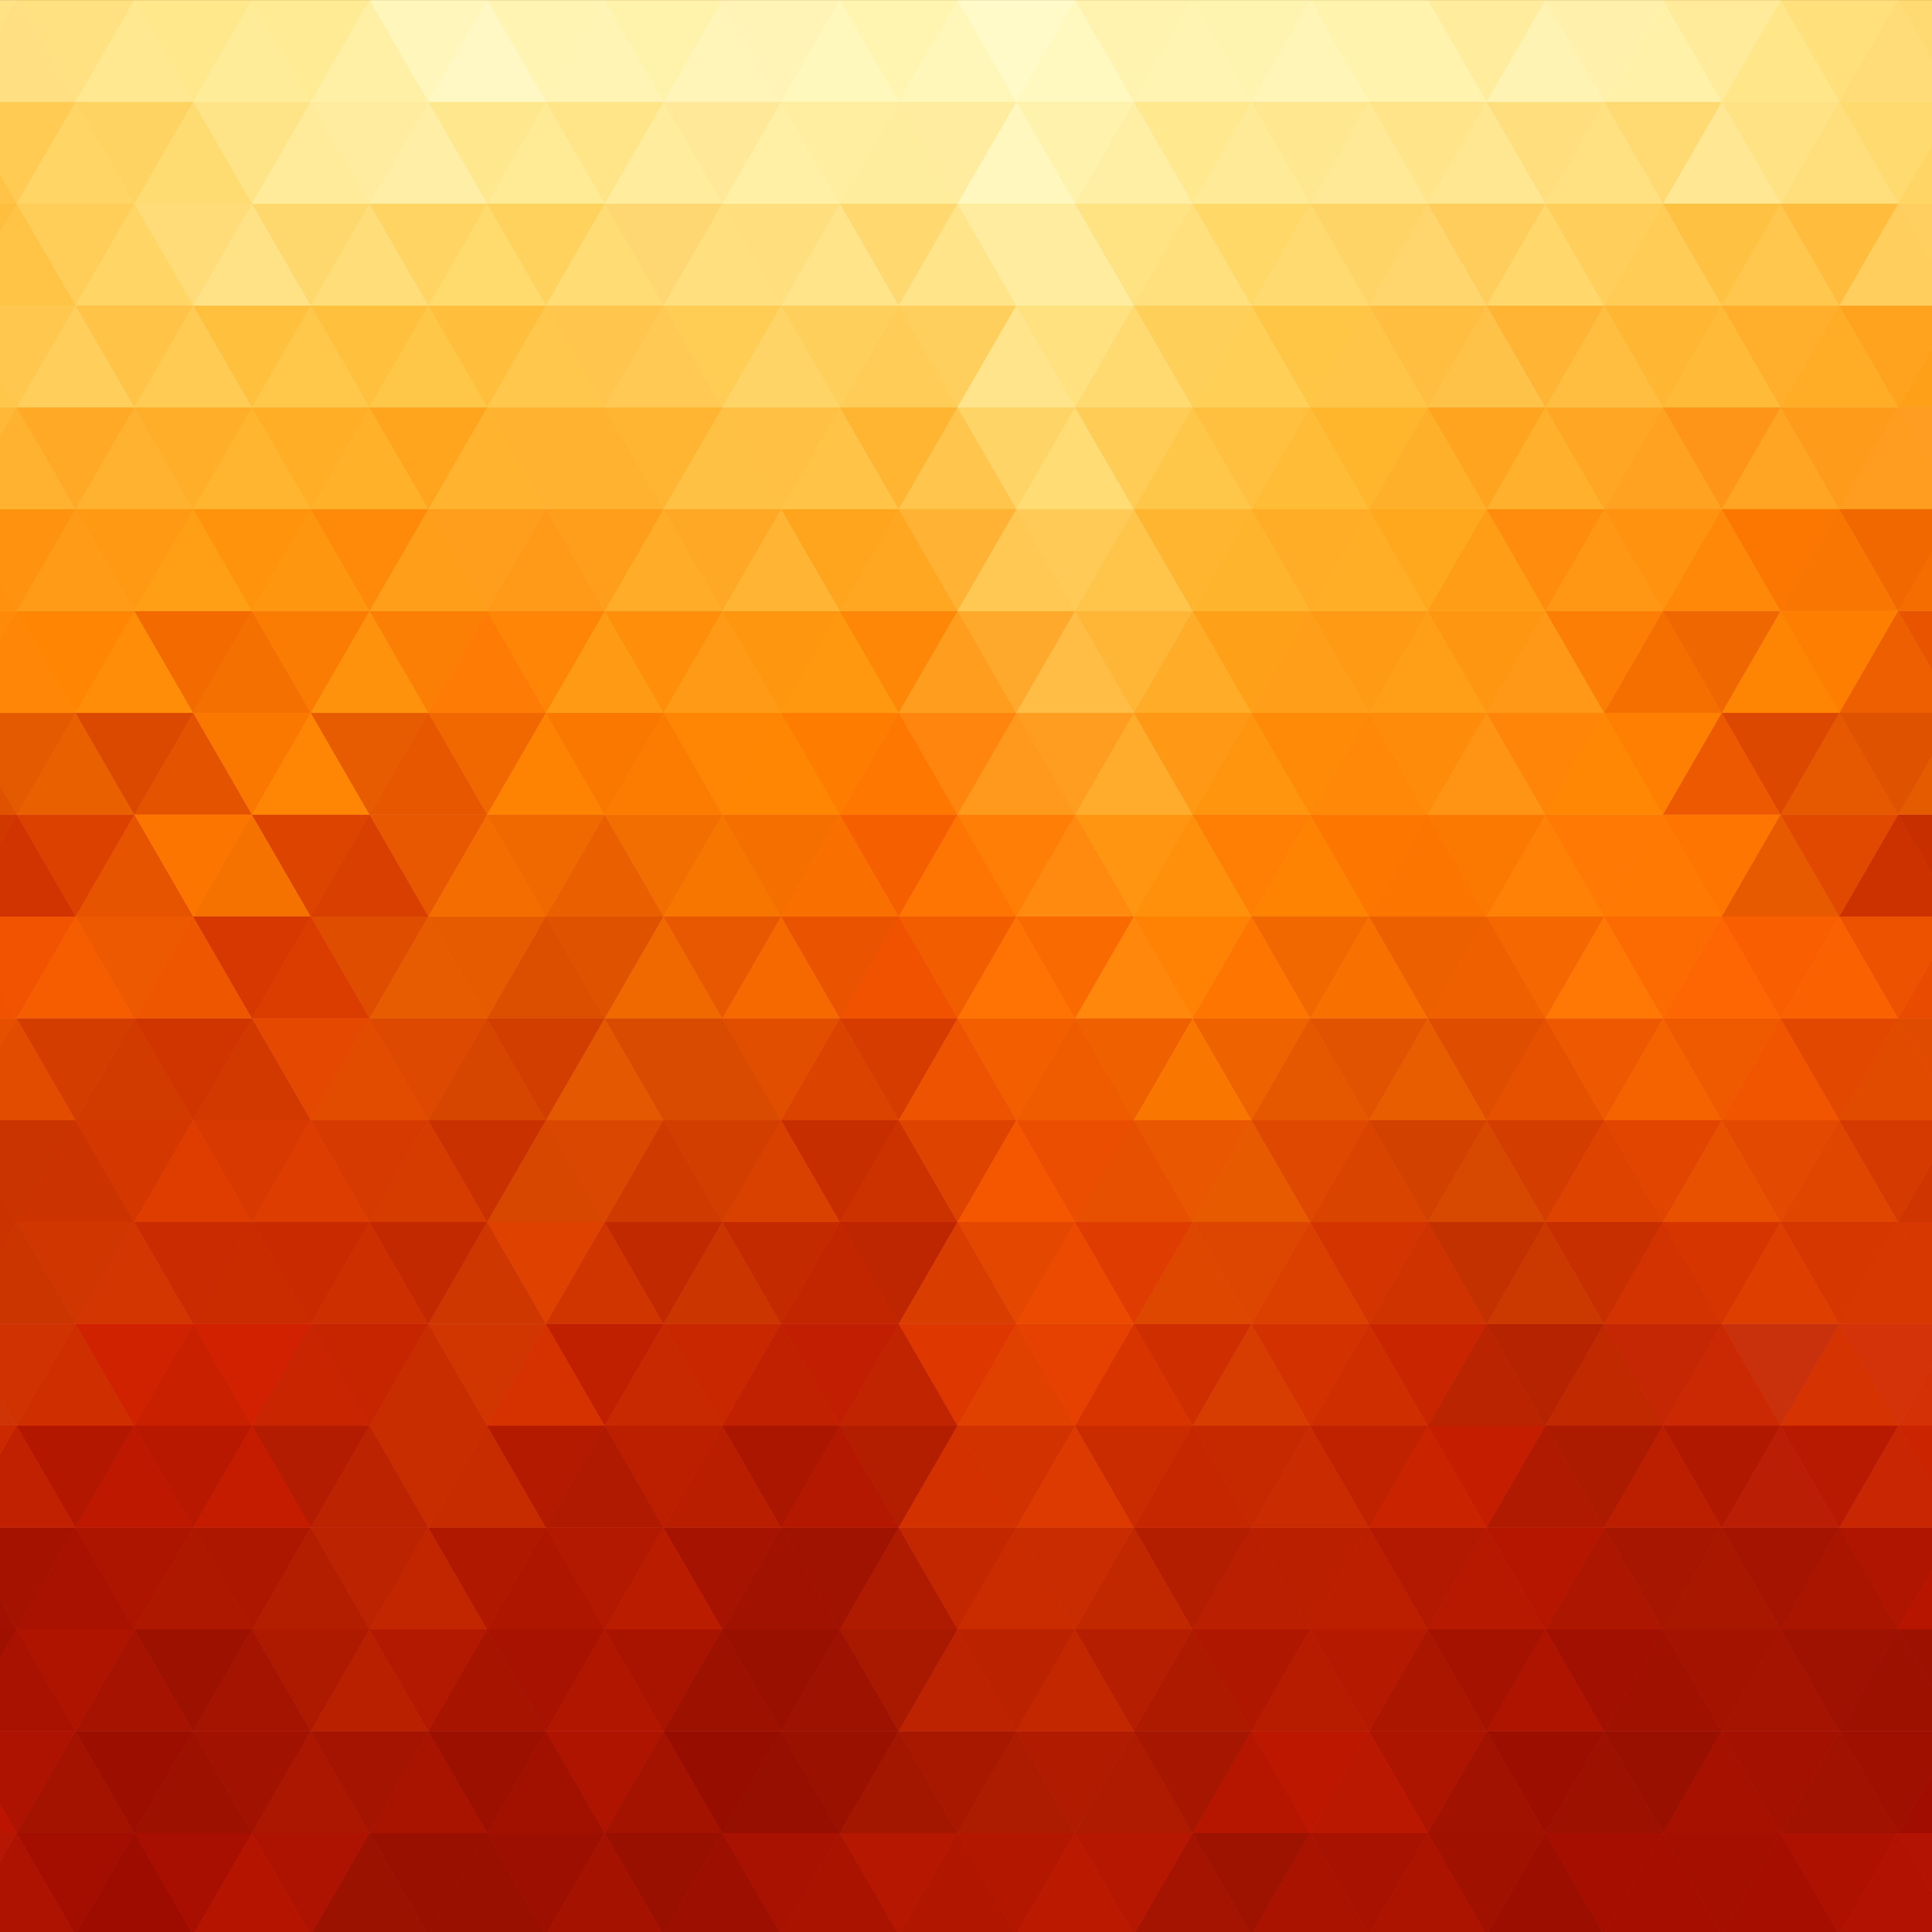 Yellow and Orange Background Gallery Yopriceville   High